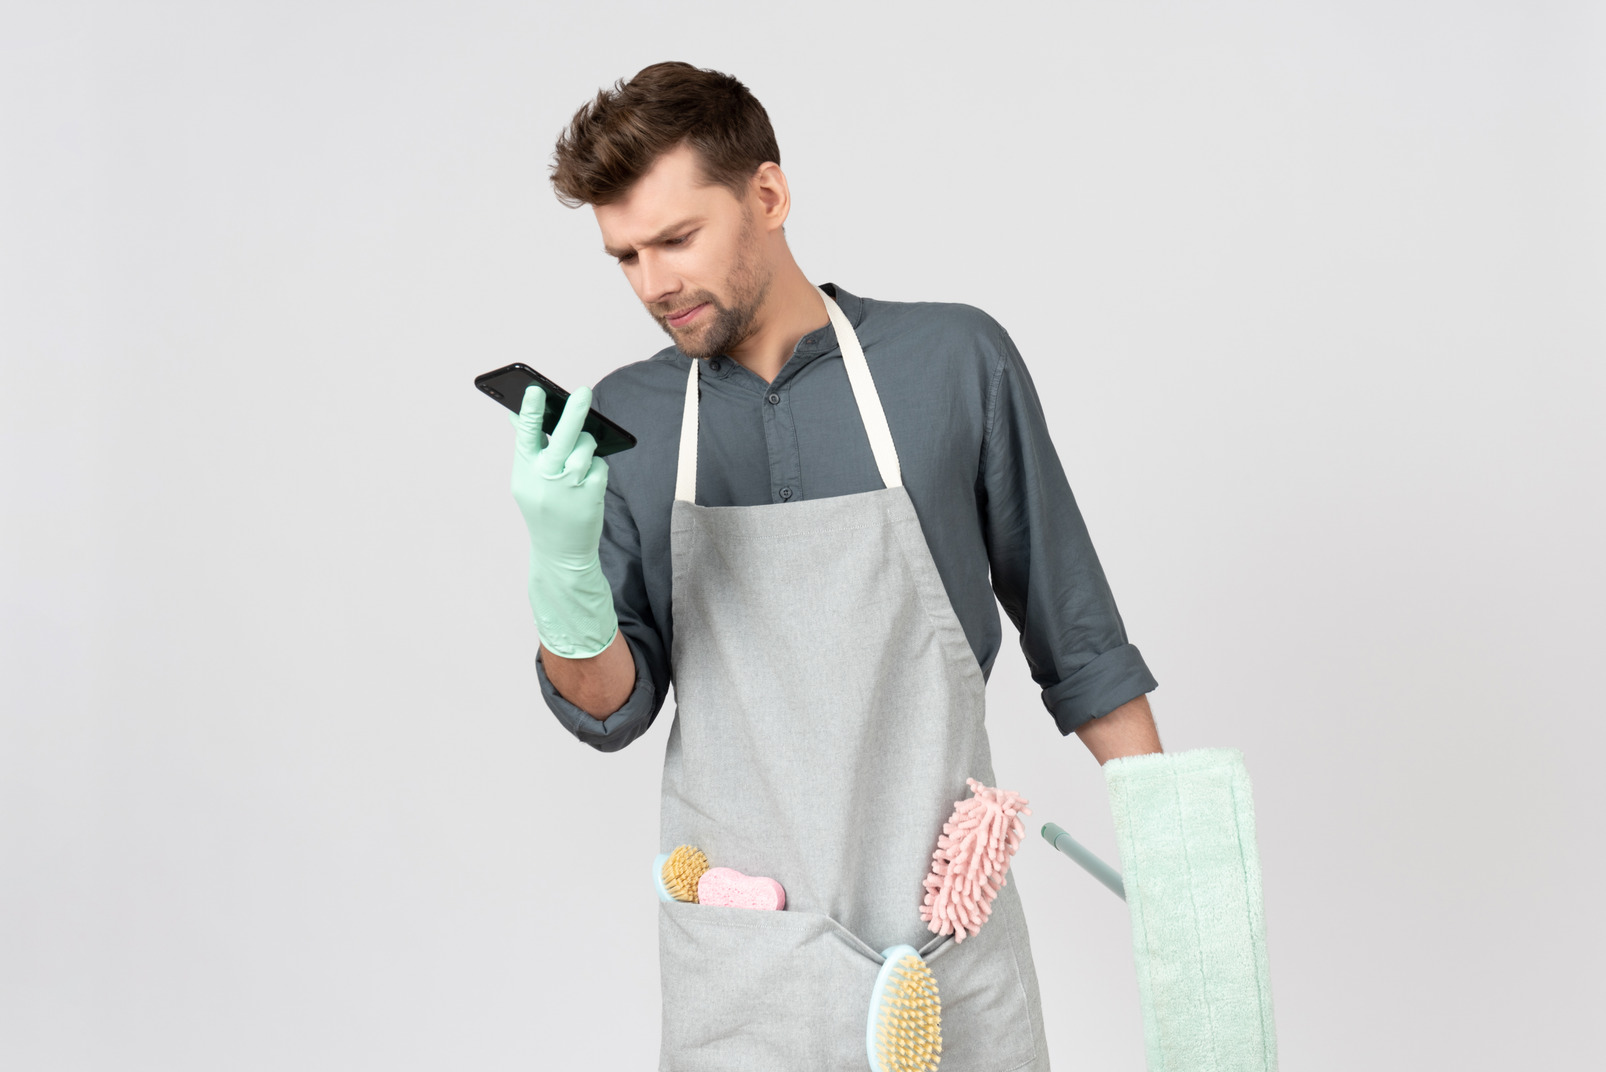 Young househusband holding mop and looking at phone